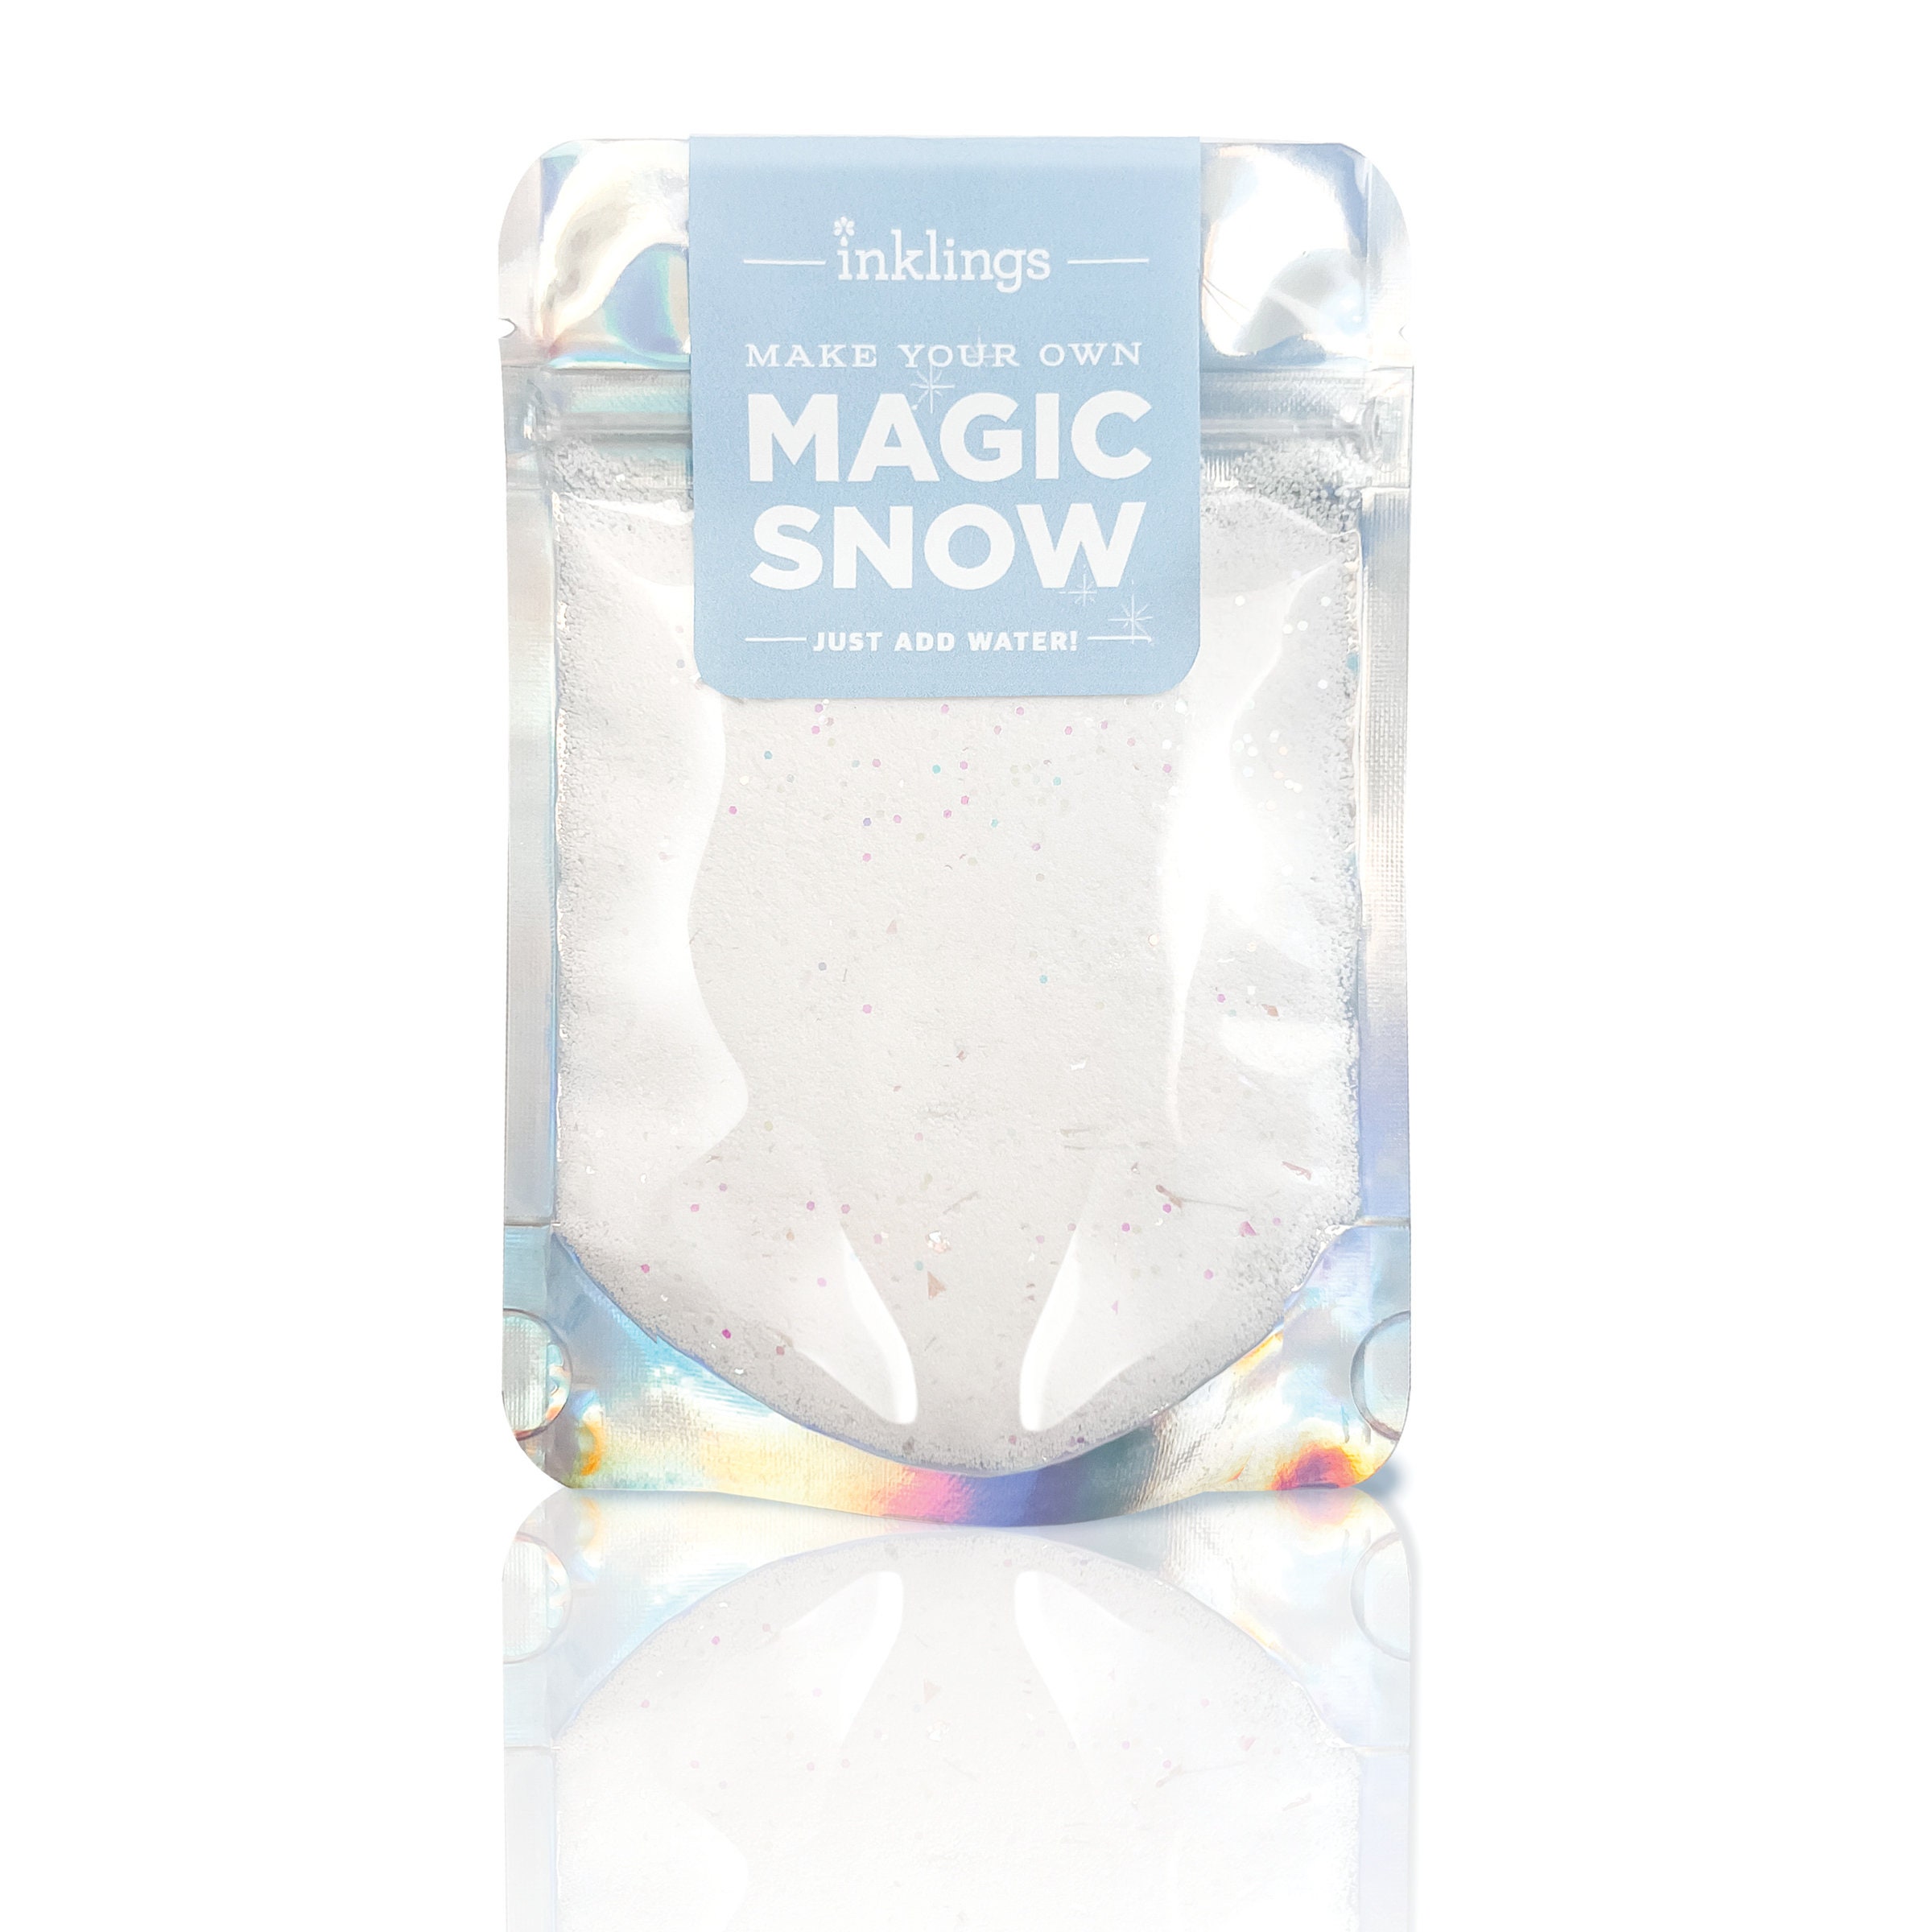 Amazing Colorful Instant Snow Powder Science Kit for Kids - China